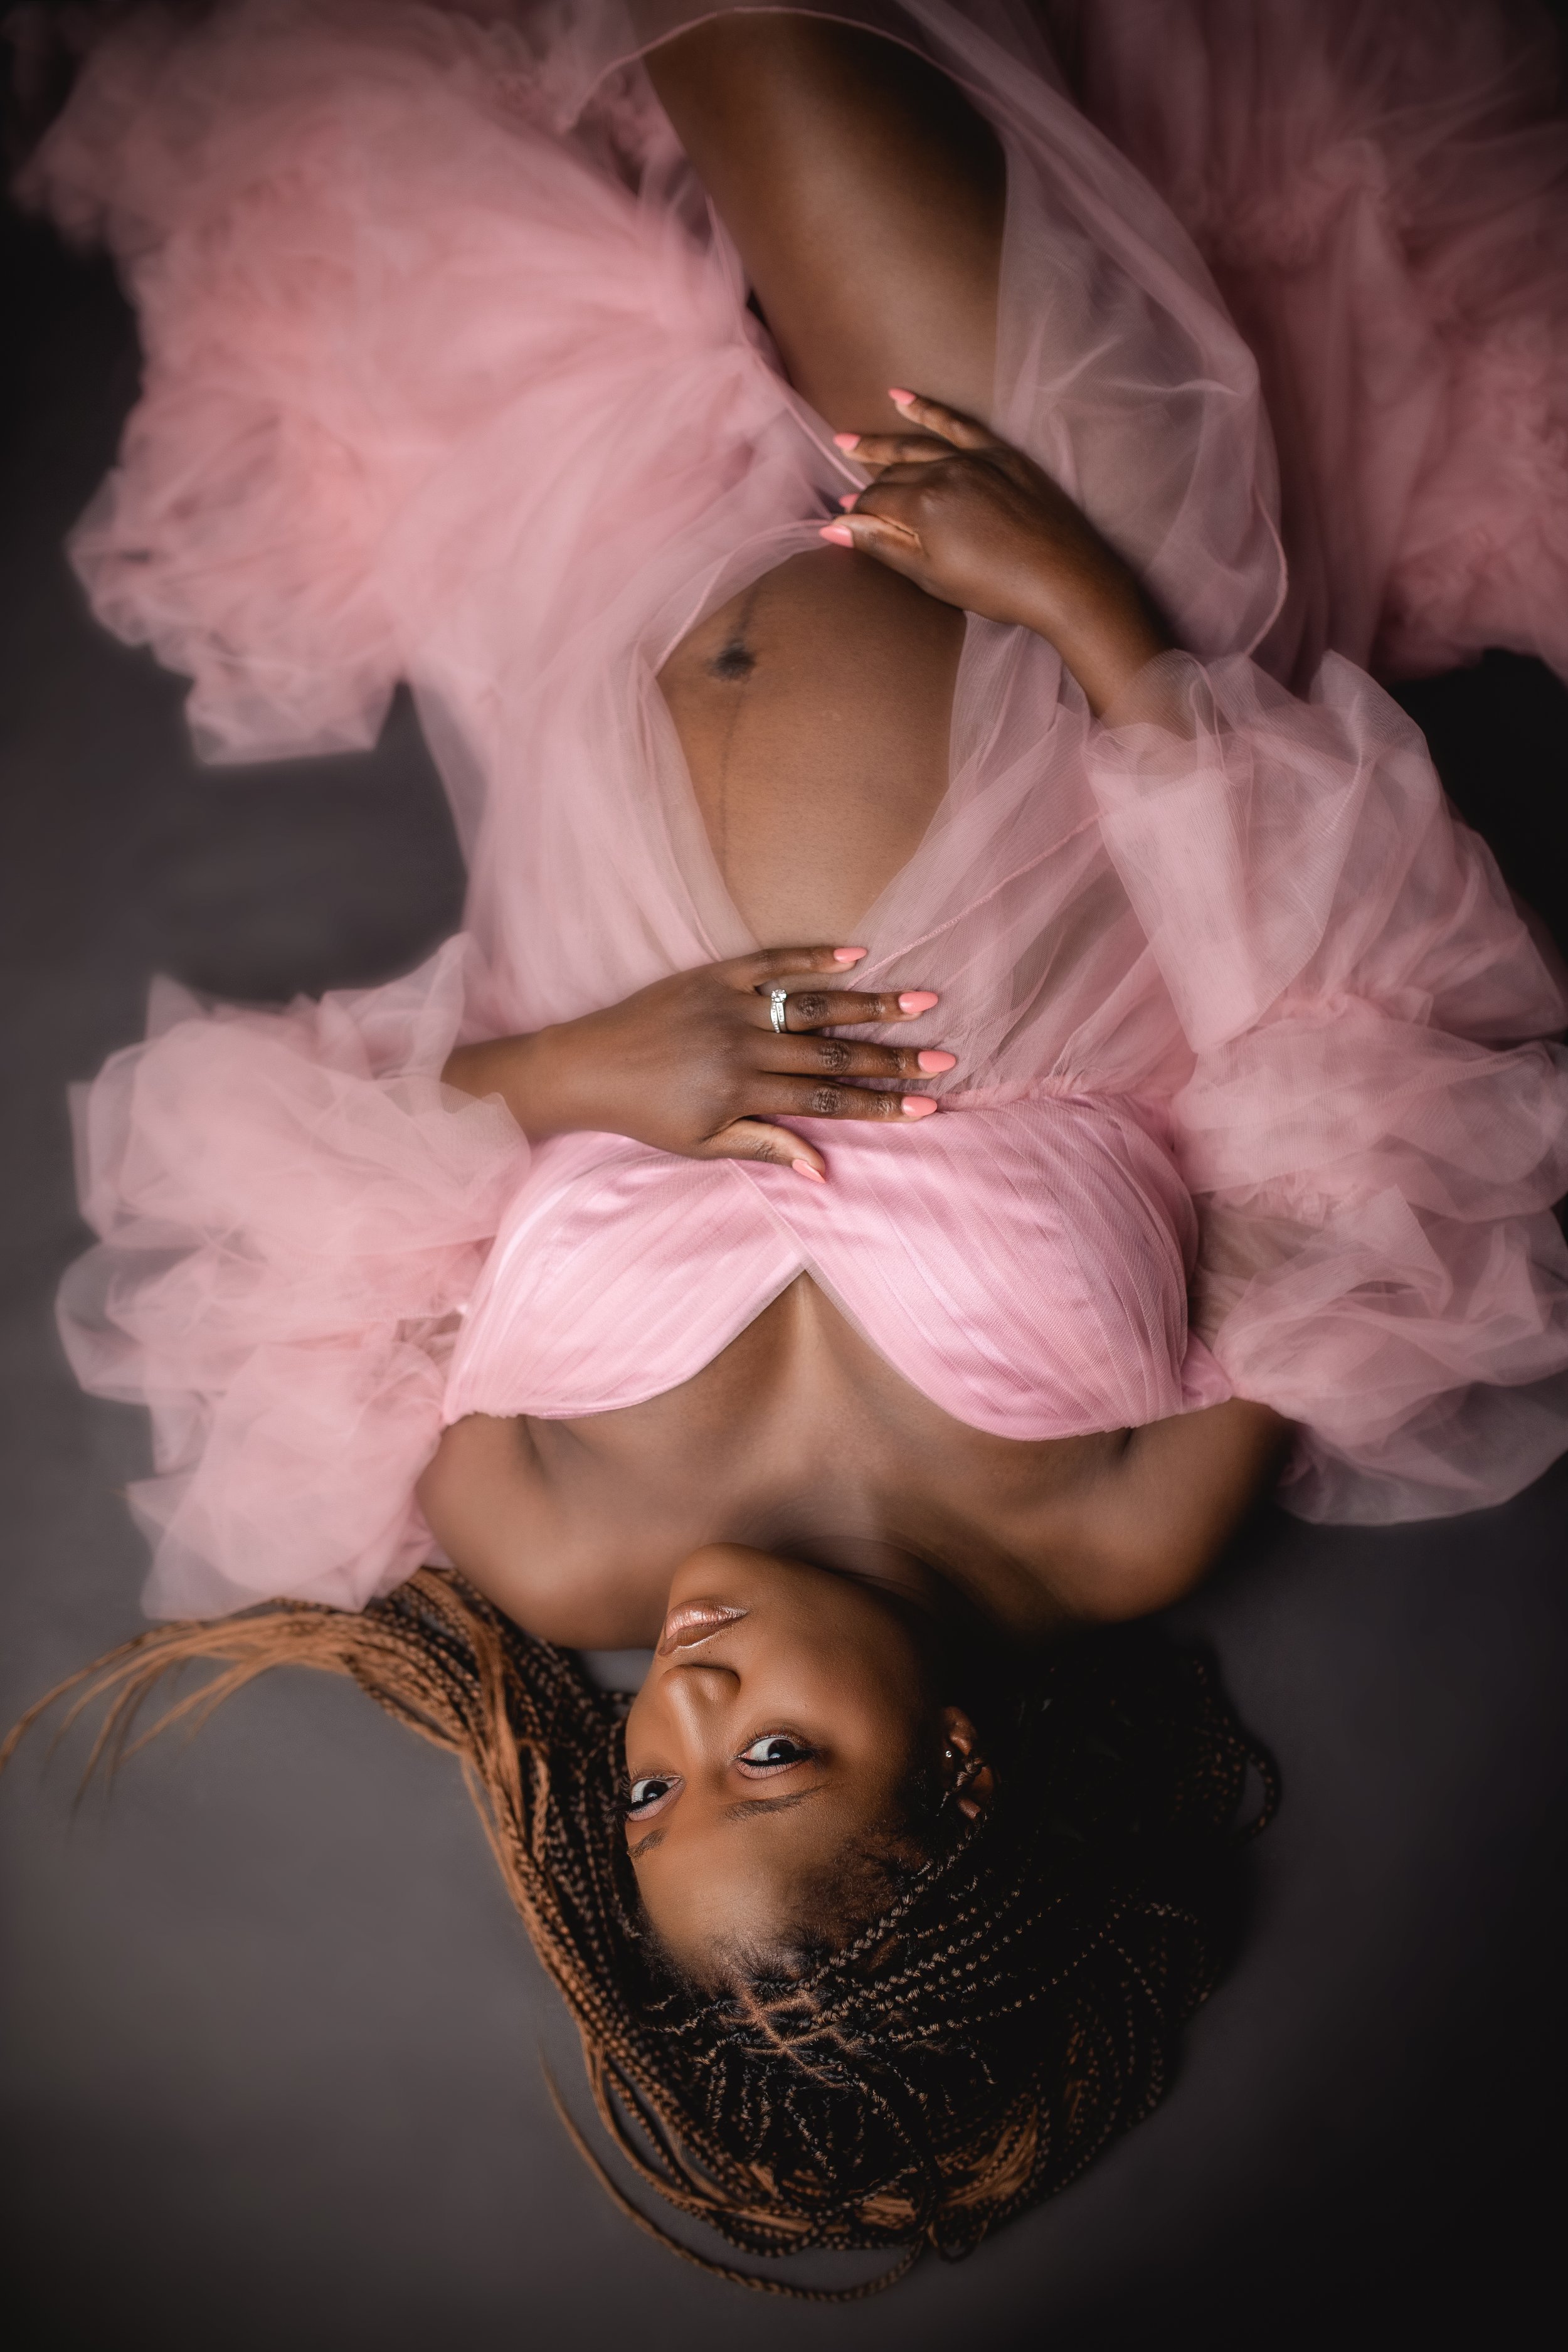  Billie Roche Photography is an award-winning photographer specializing in newborn, maternity, baby, and family photography in Houston, Texas. Serving surrounding areas like Fulshear, Katy, Richmond, Sugar Land, Missouri, Rosenberg, Cypress, Spring, 